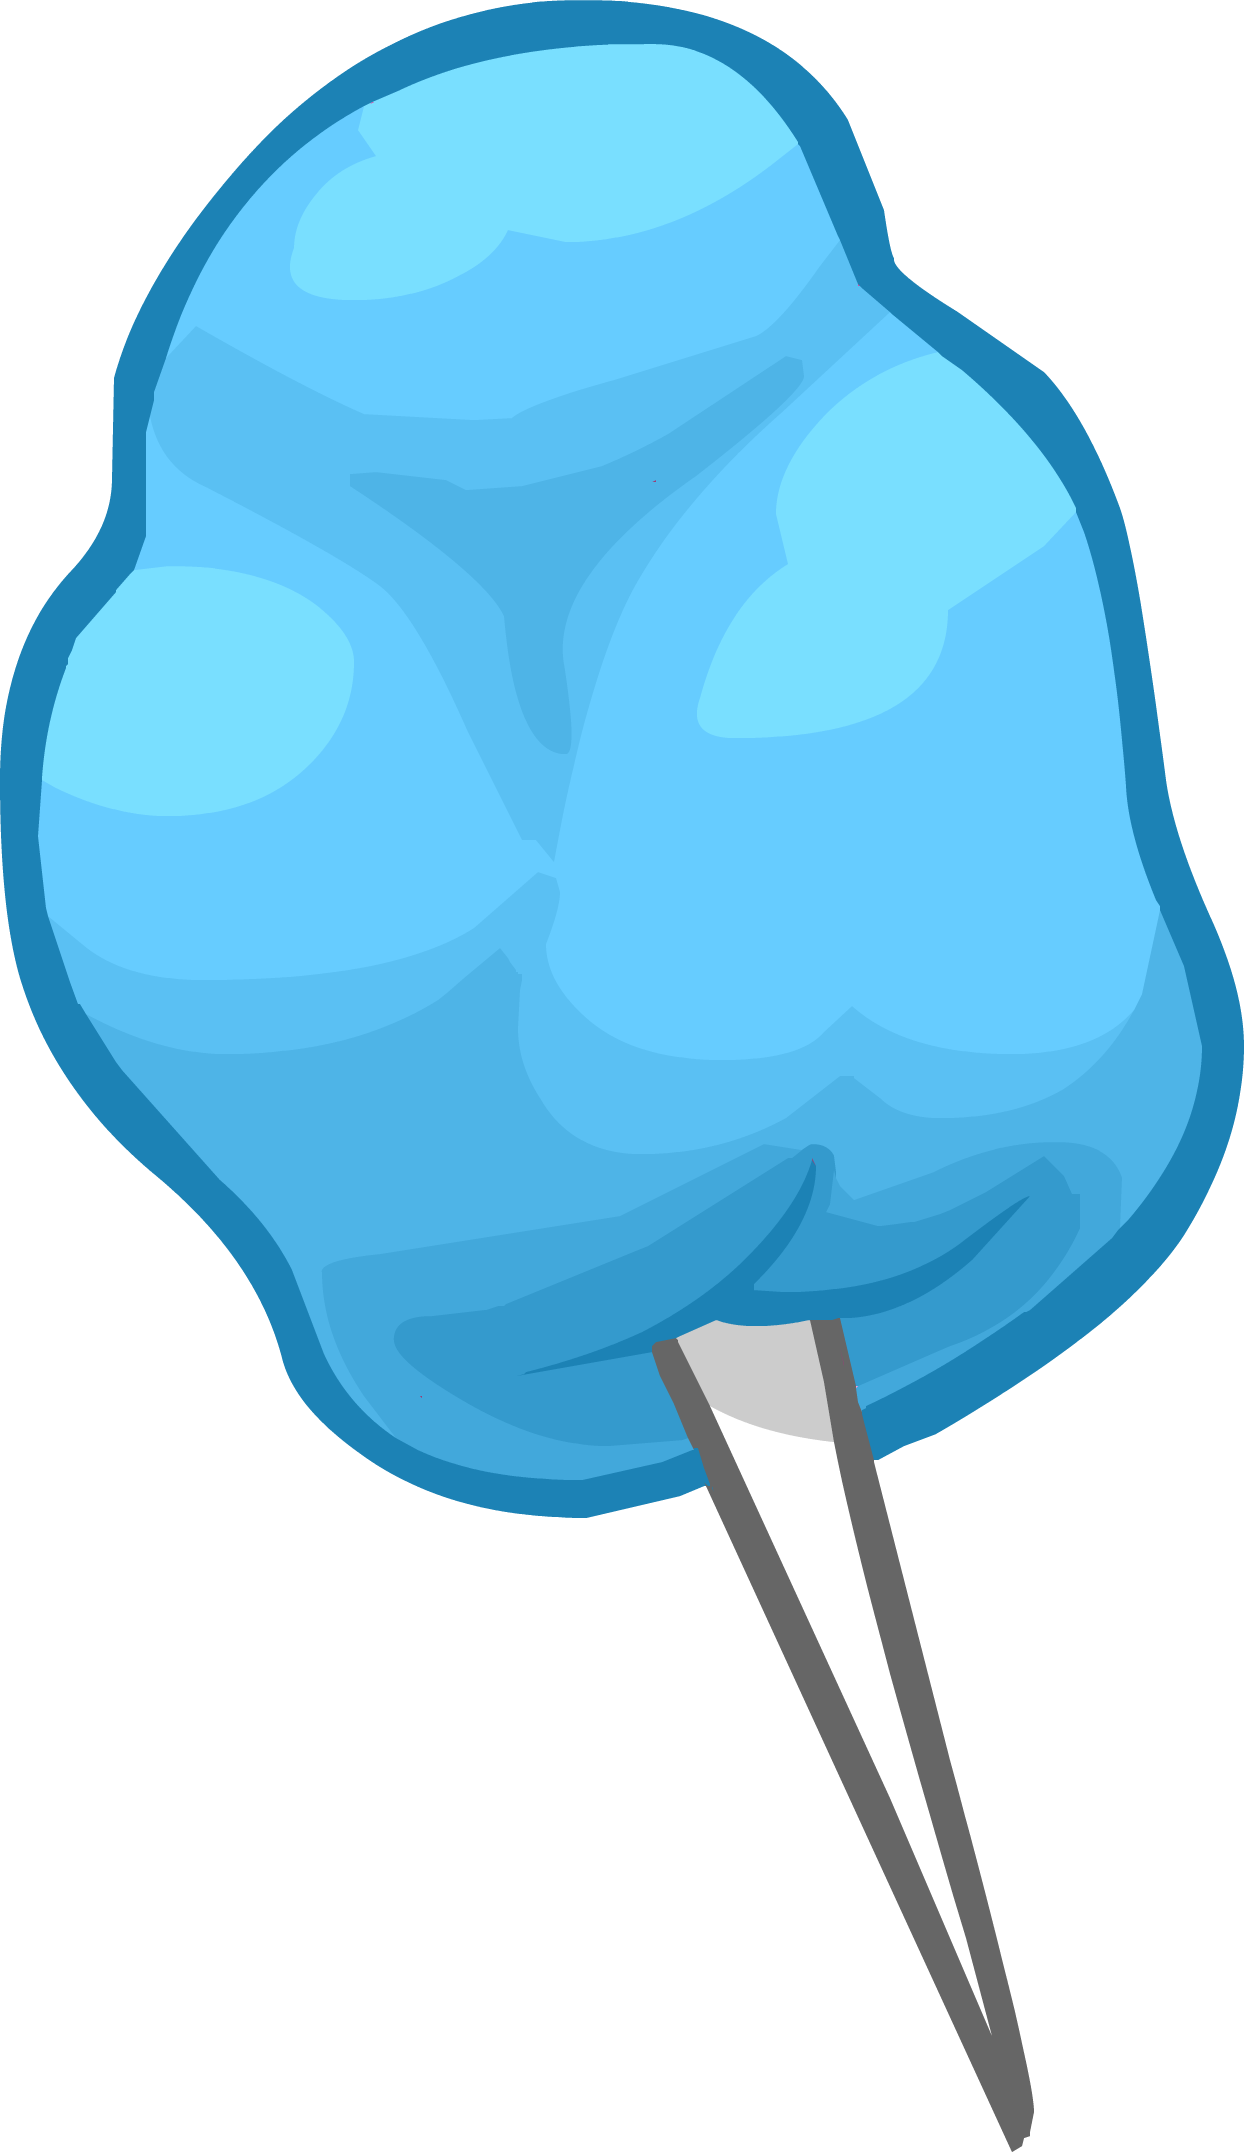 Image blue cotton png. Cute clipart candy